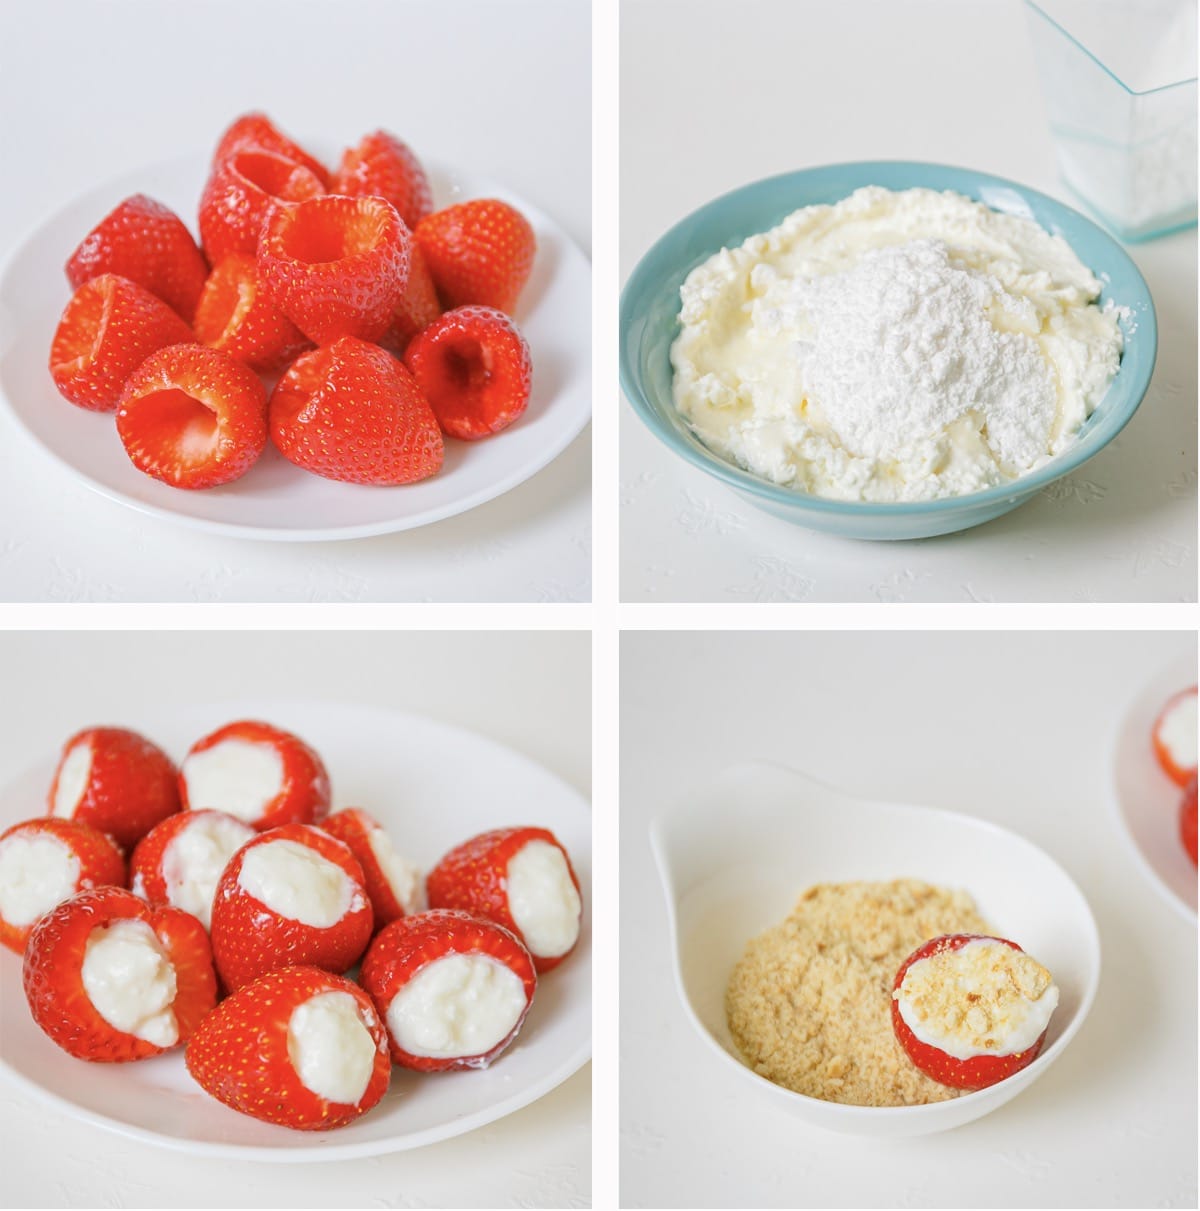 step by step images showing how to make Cheesecake Stuffed Strawberries